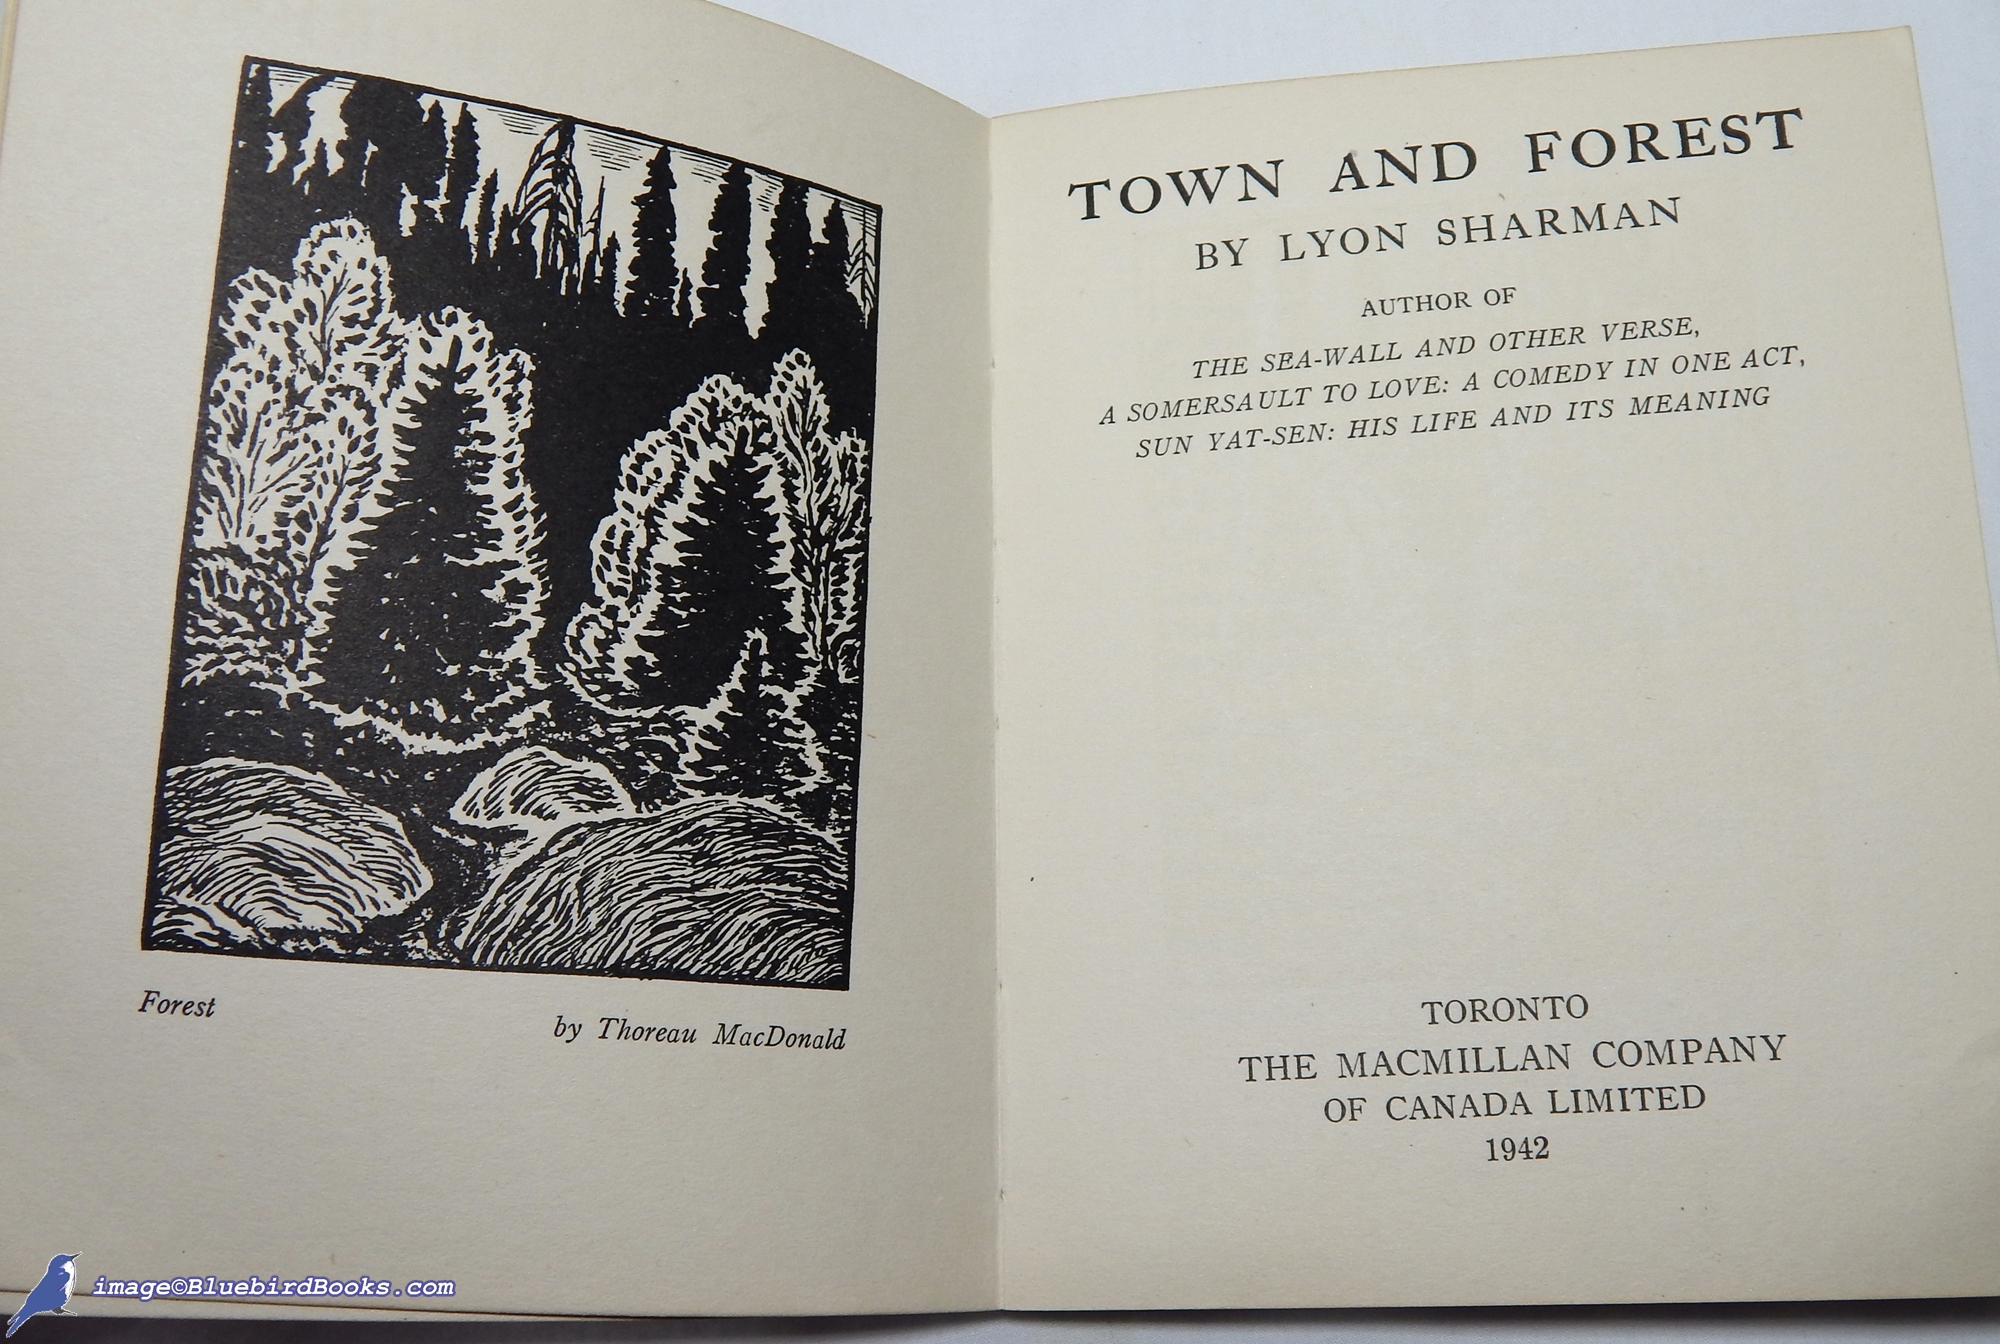 SHARMAN, LYON - Town and Forest